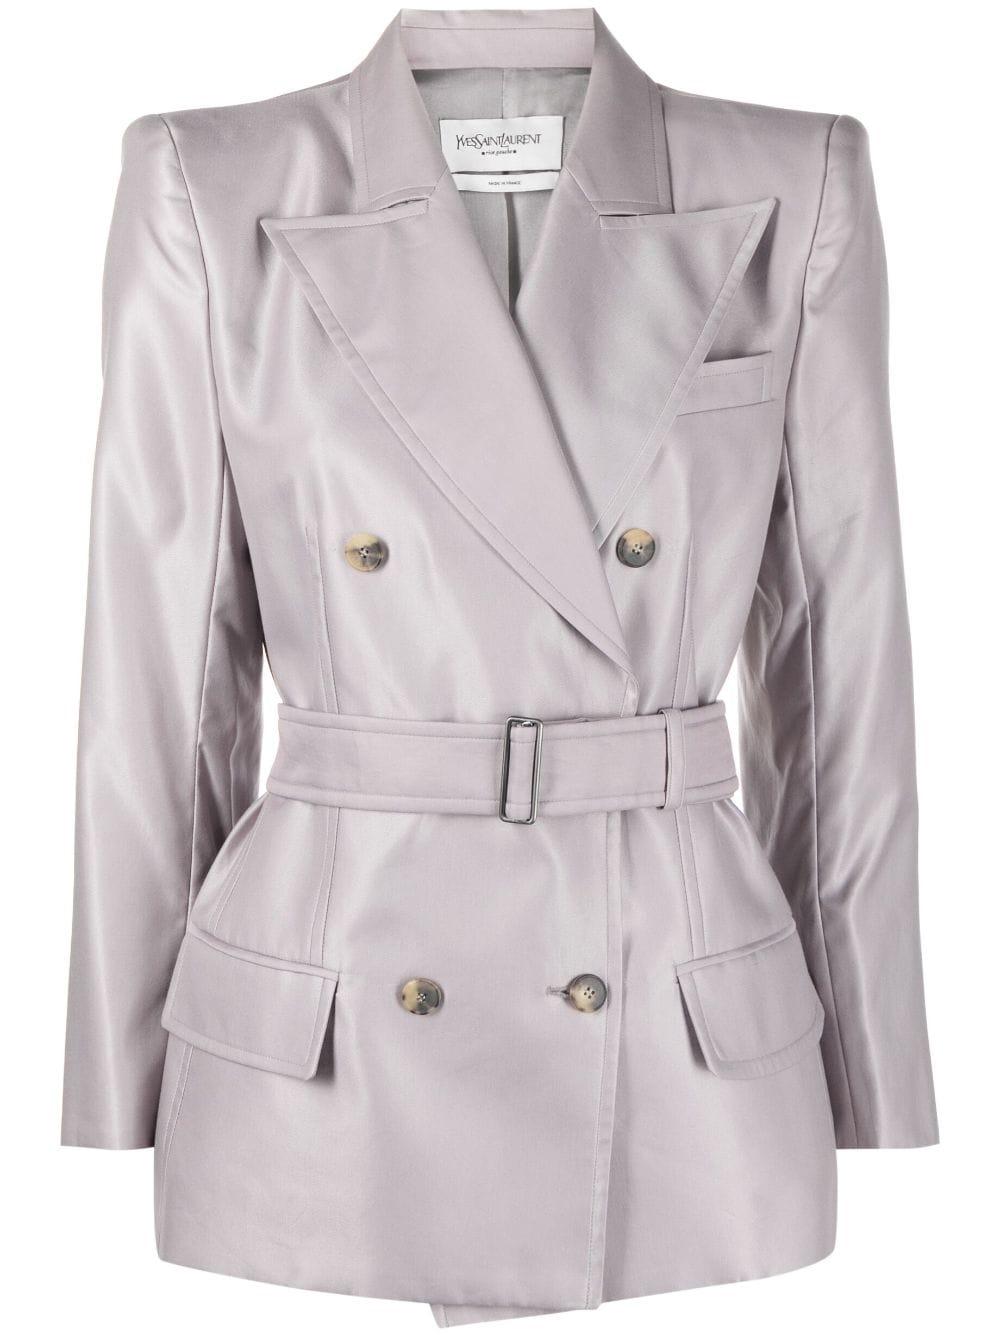 Yves Saint Laurent by Tom Ford Satin Lilac Blazer For Sale 3